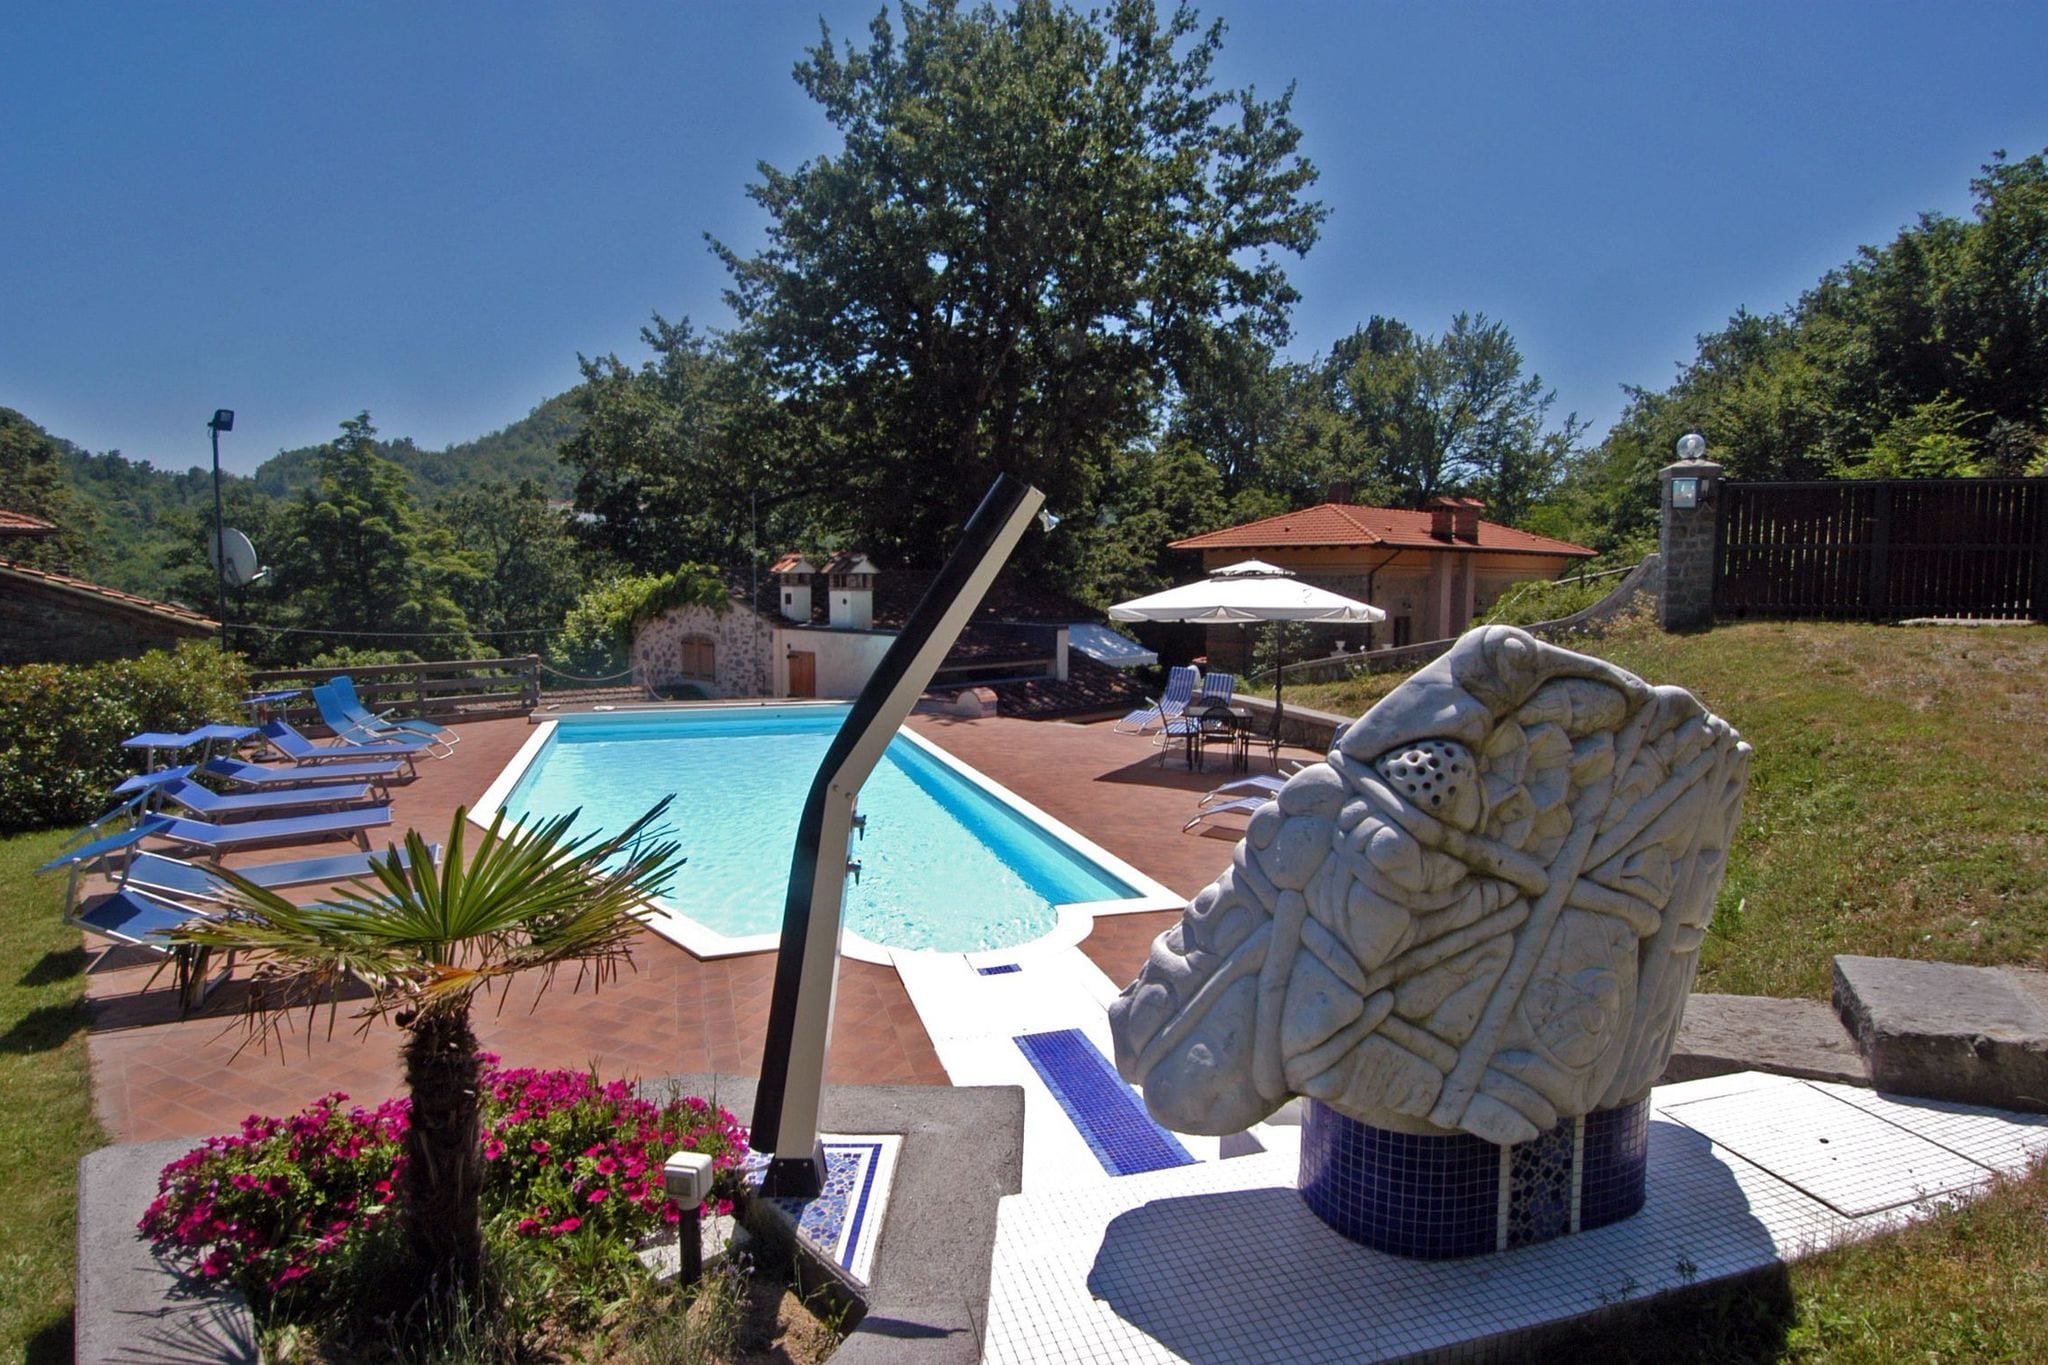 Exclusive villa in the countryside of Pistoia with private pool and bubble bath